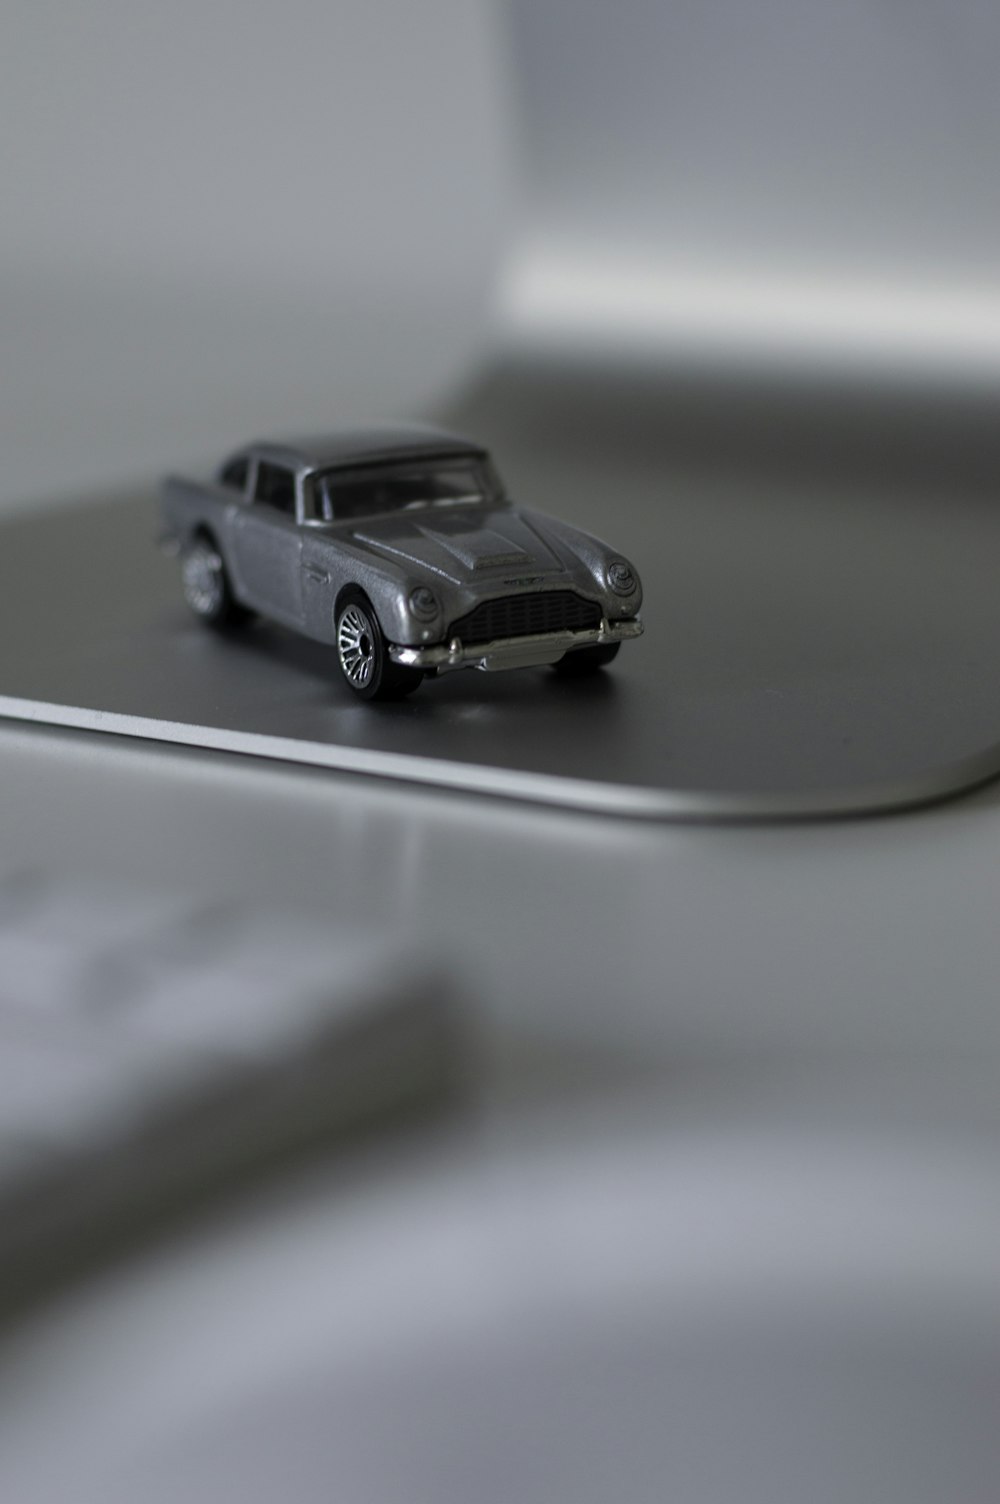 shallow focus photography of silver die-cast car model